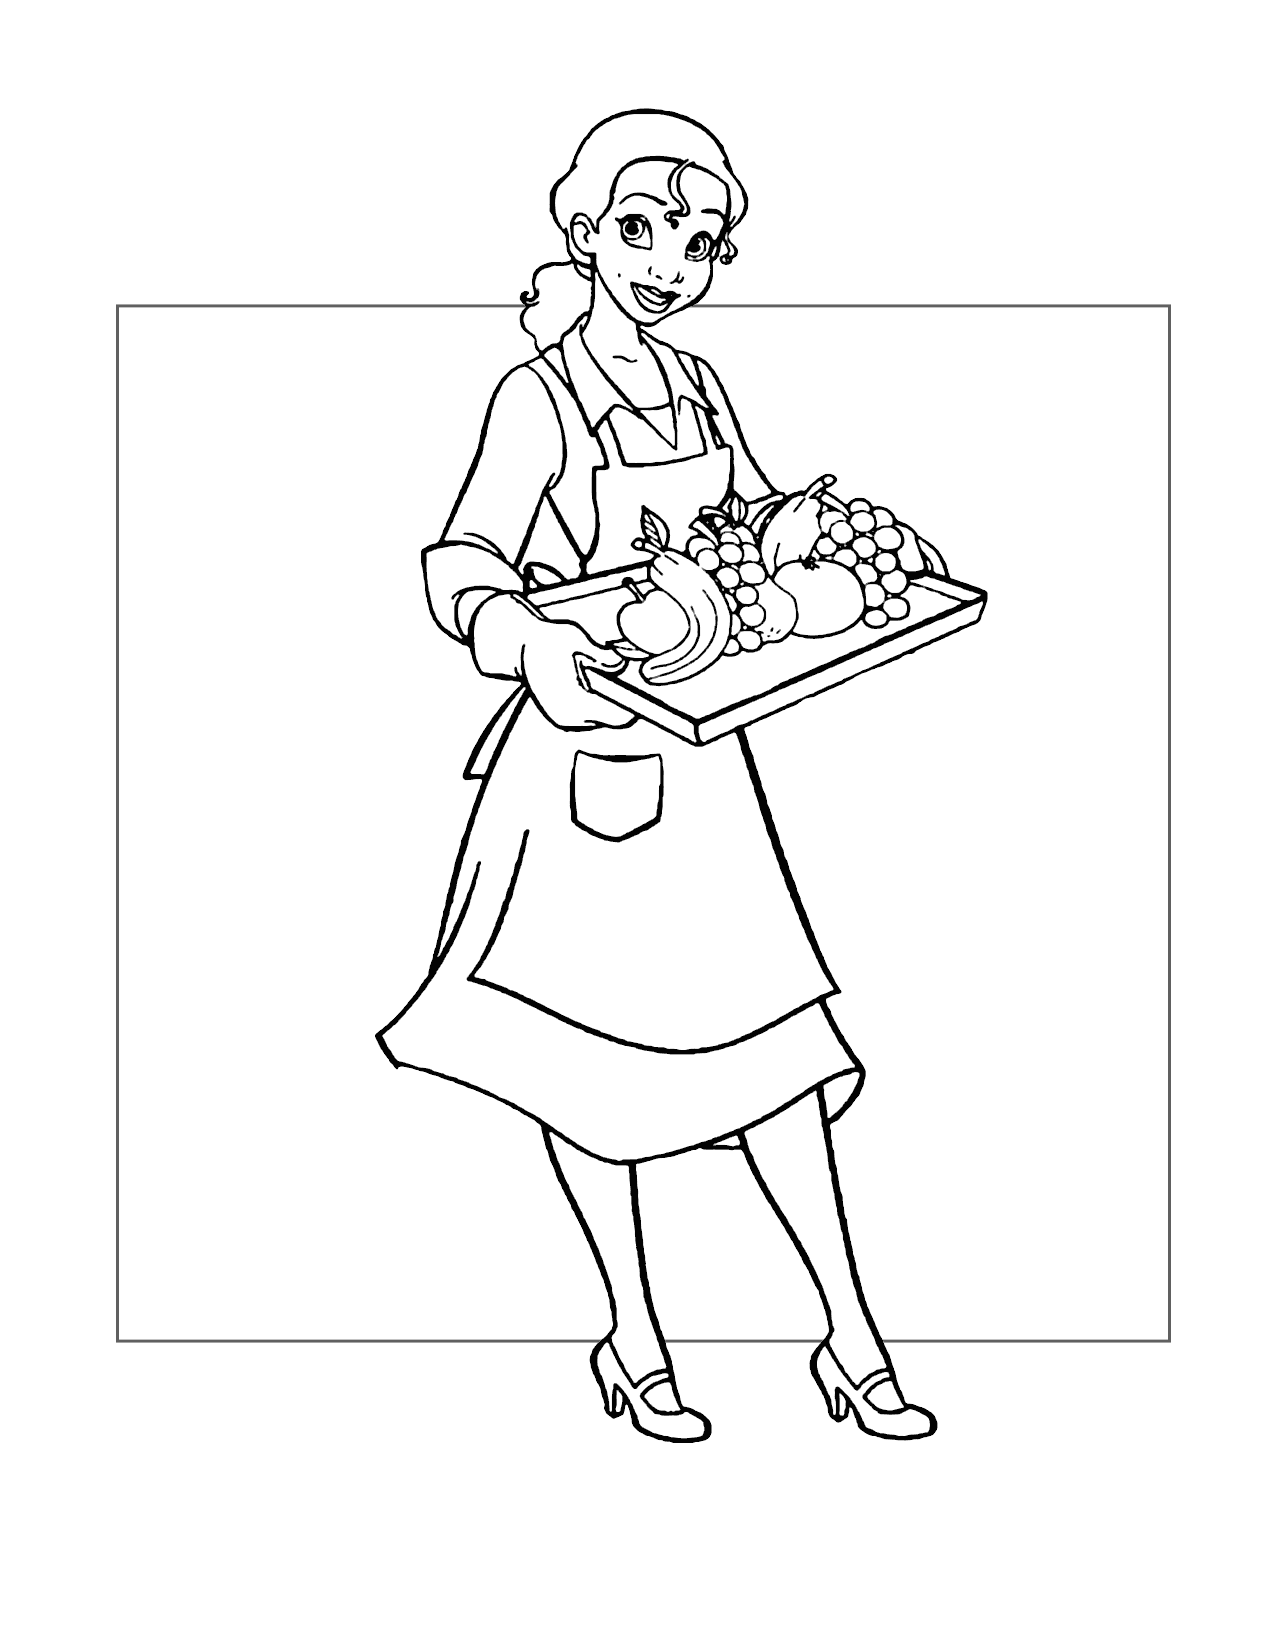 Tiana Loves To Feed People Coloring Page